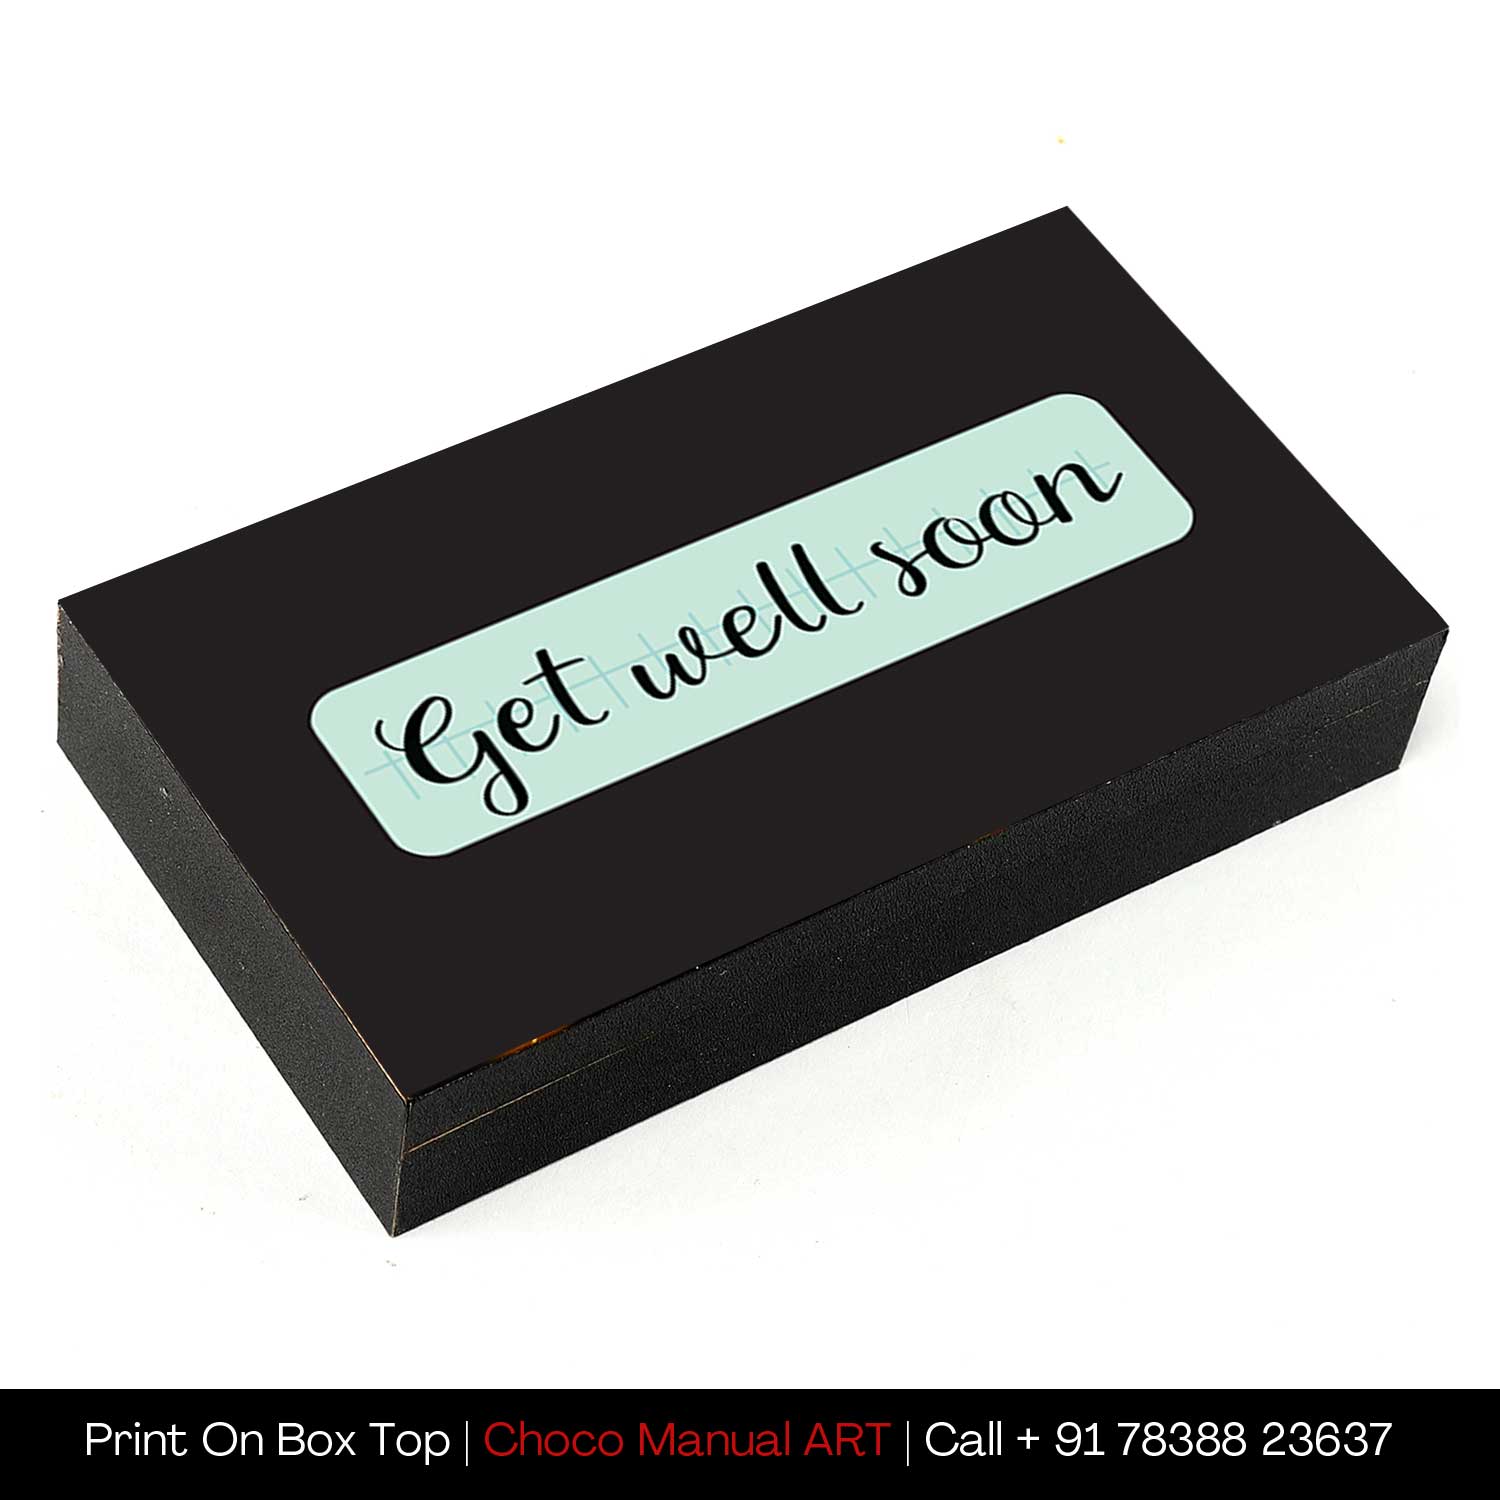 Get Well Soon Personalised Printed chocolate Gifts